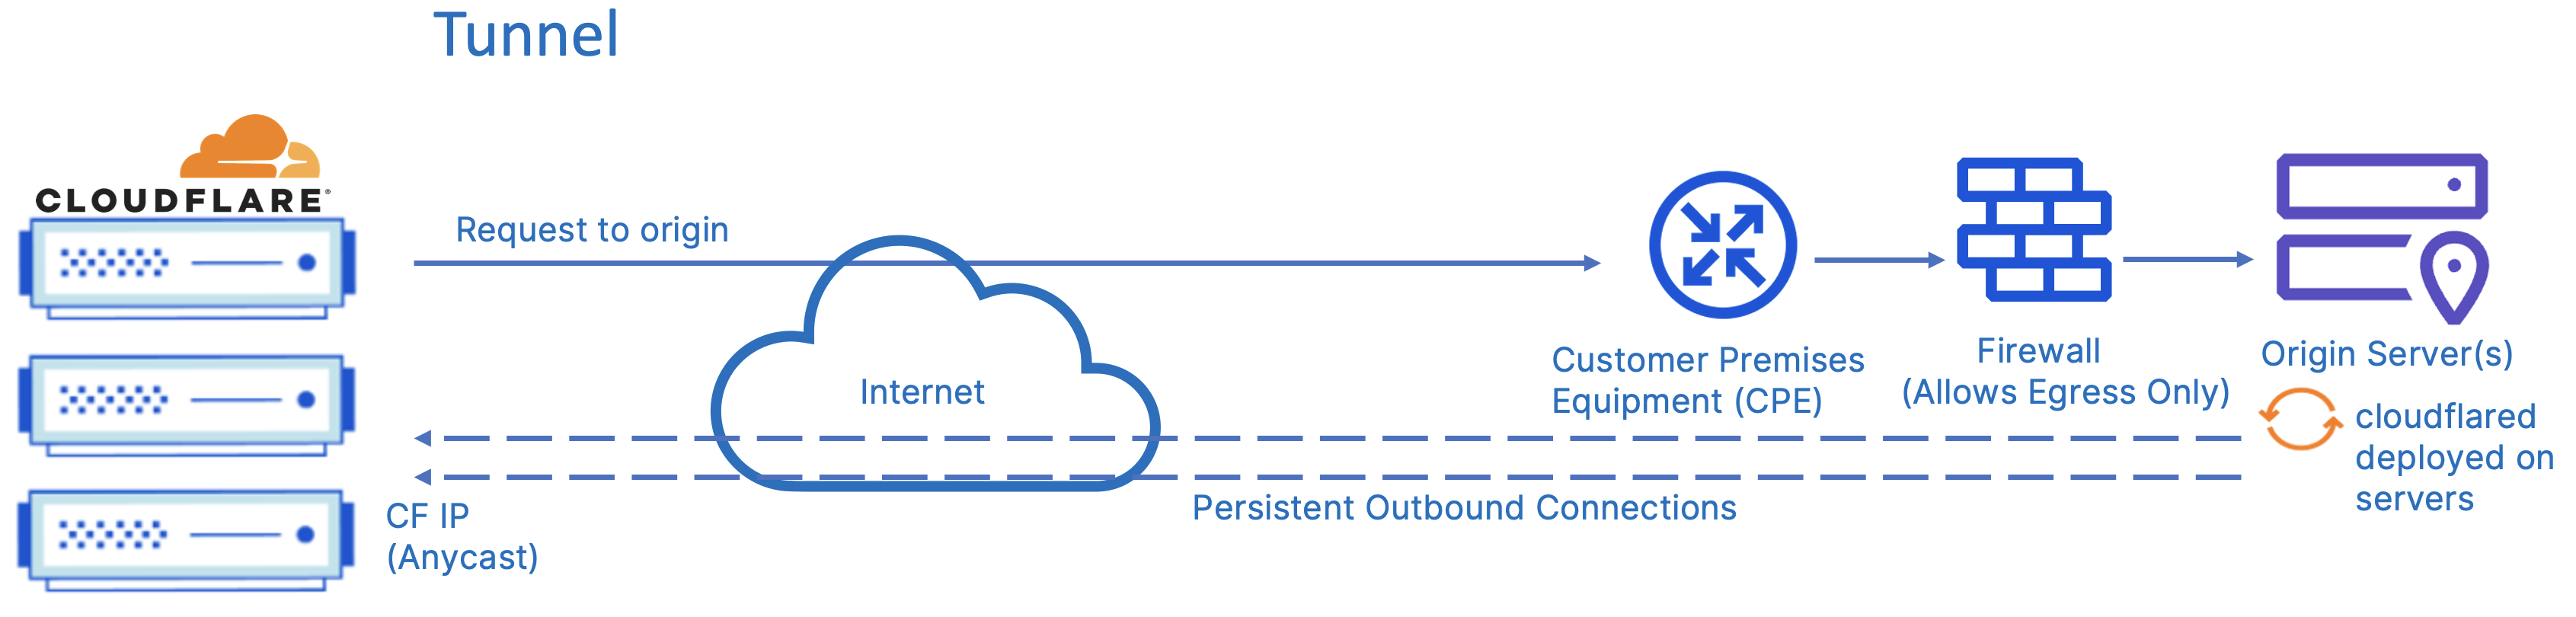 Figure 13: Connectivity from Cloudflare to origin server(s) via Cloudflare Tunnel